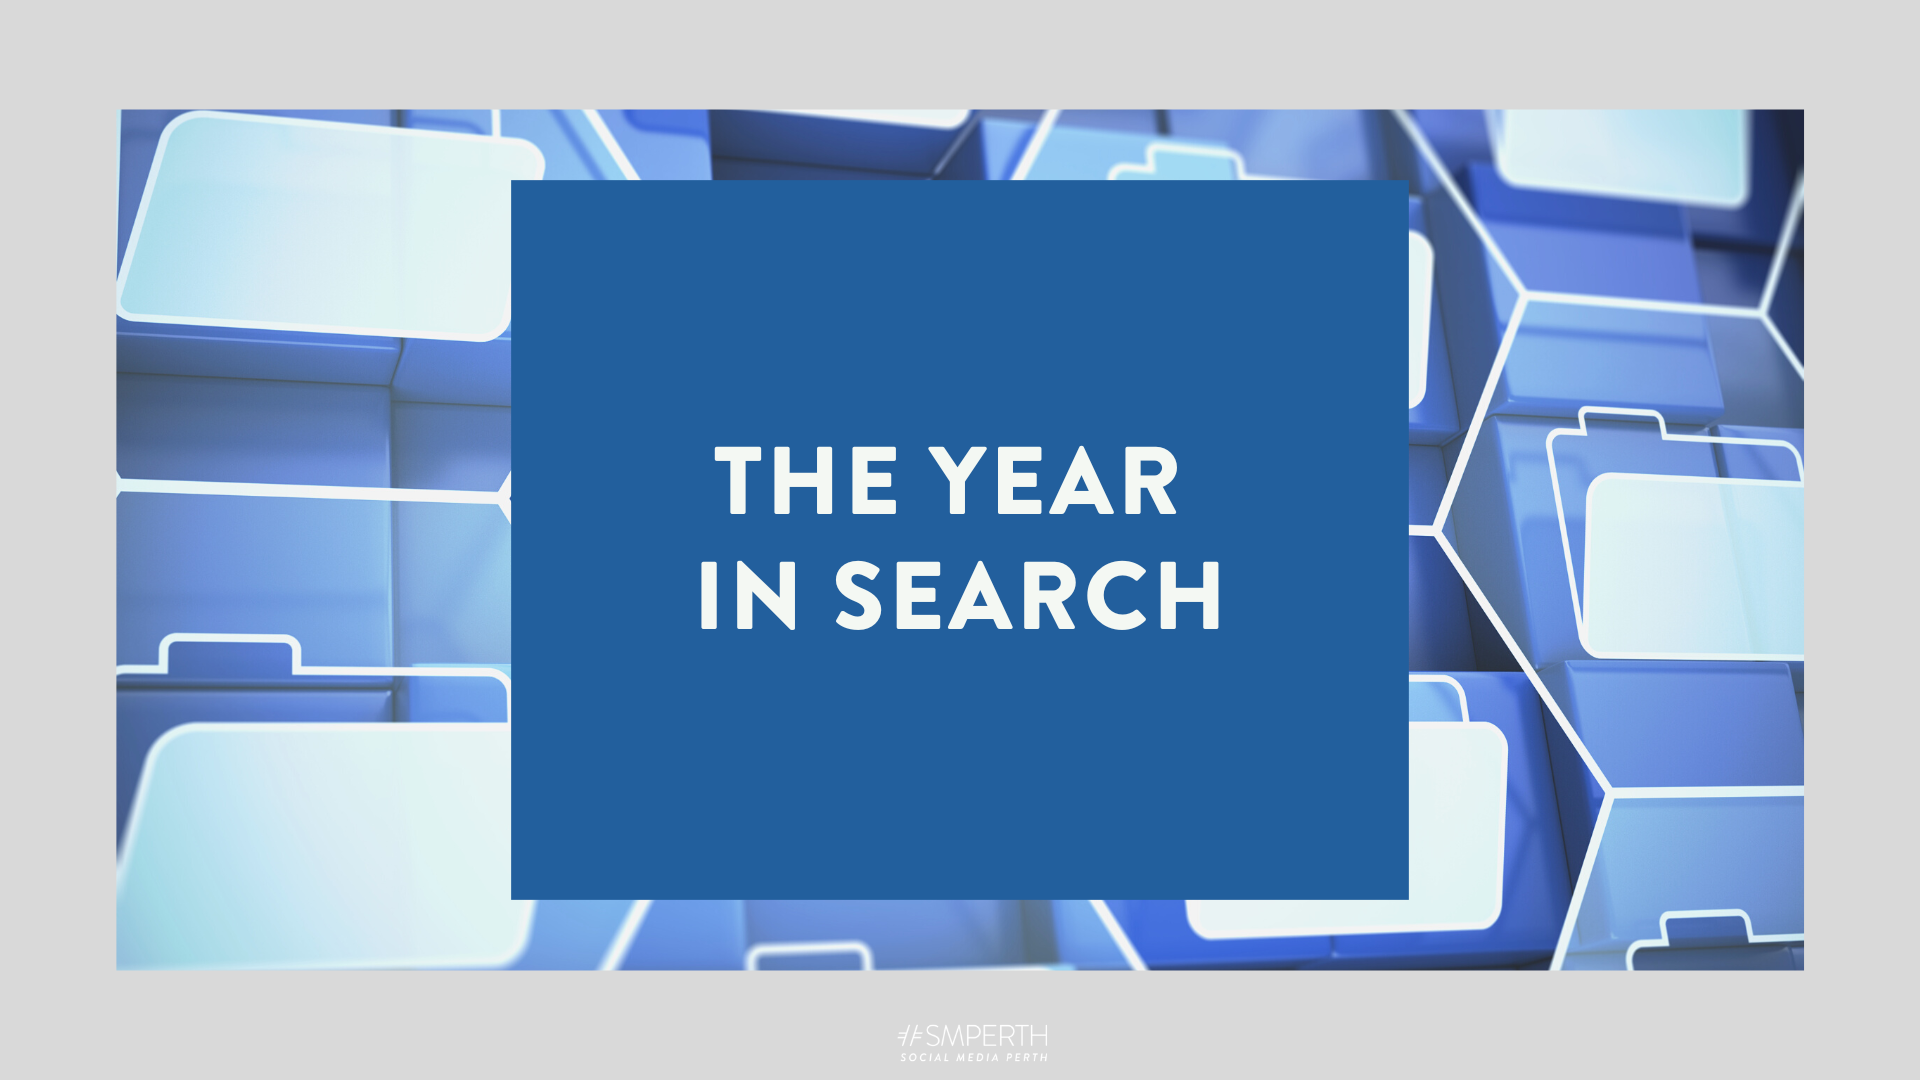 The Year in Search